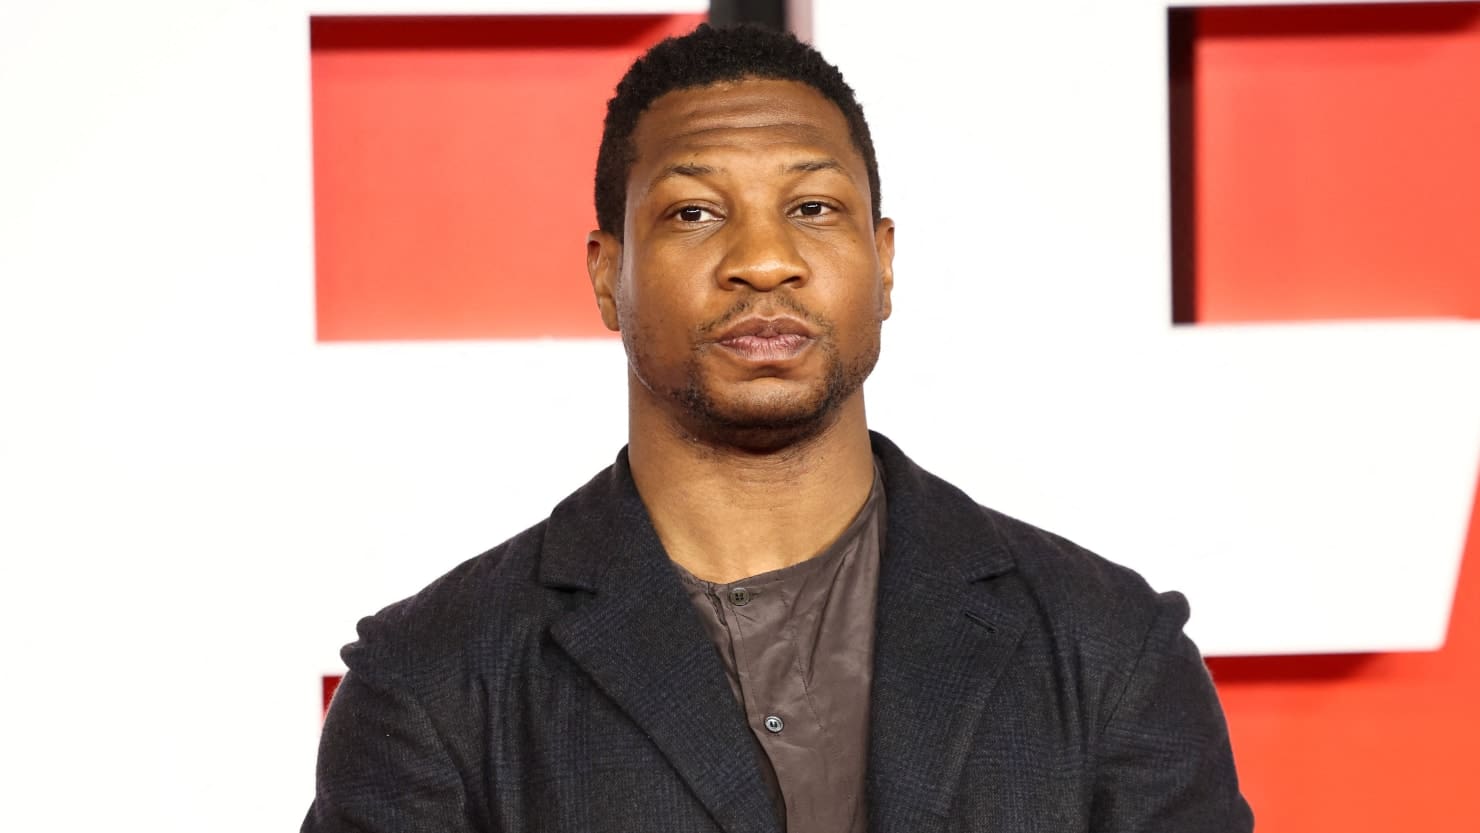 Jonathan Majors’ Alleged Victim Parties After Incident [Video]